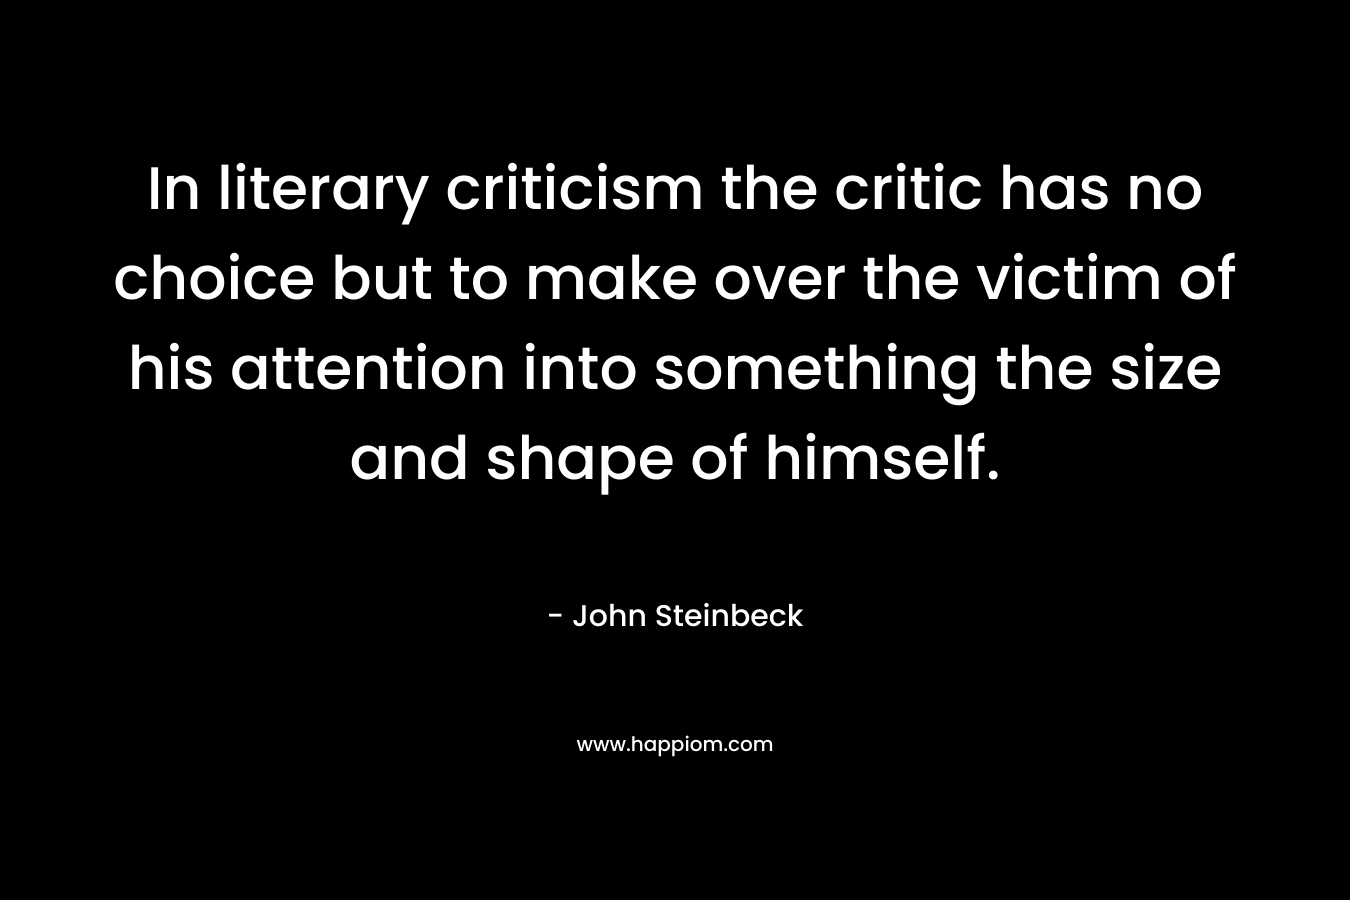 In literary criticism the critic has no choice but to make over the victim of his attention into something the size and shape of himself.